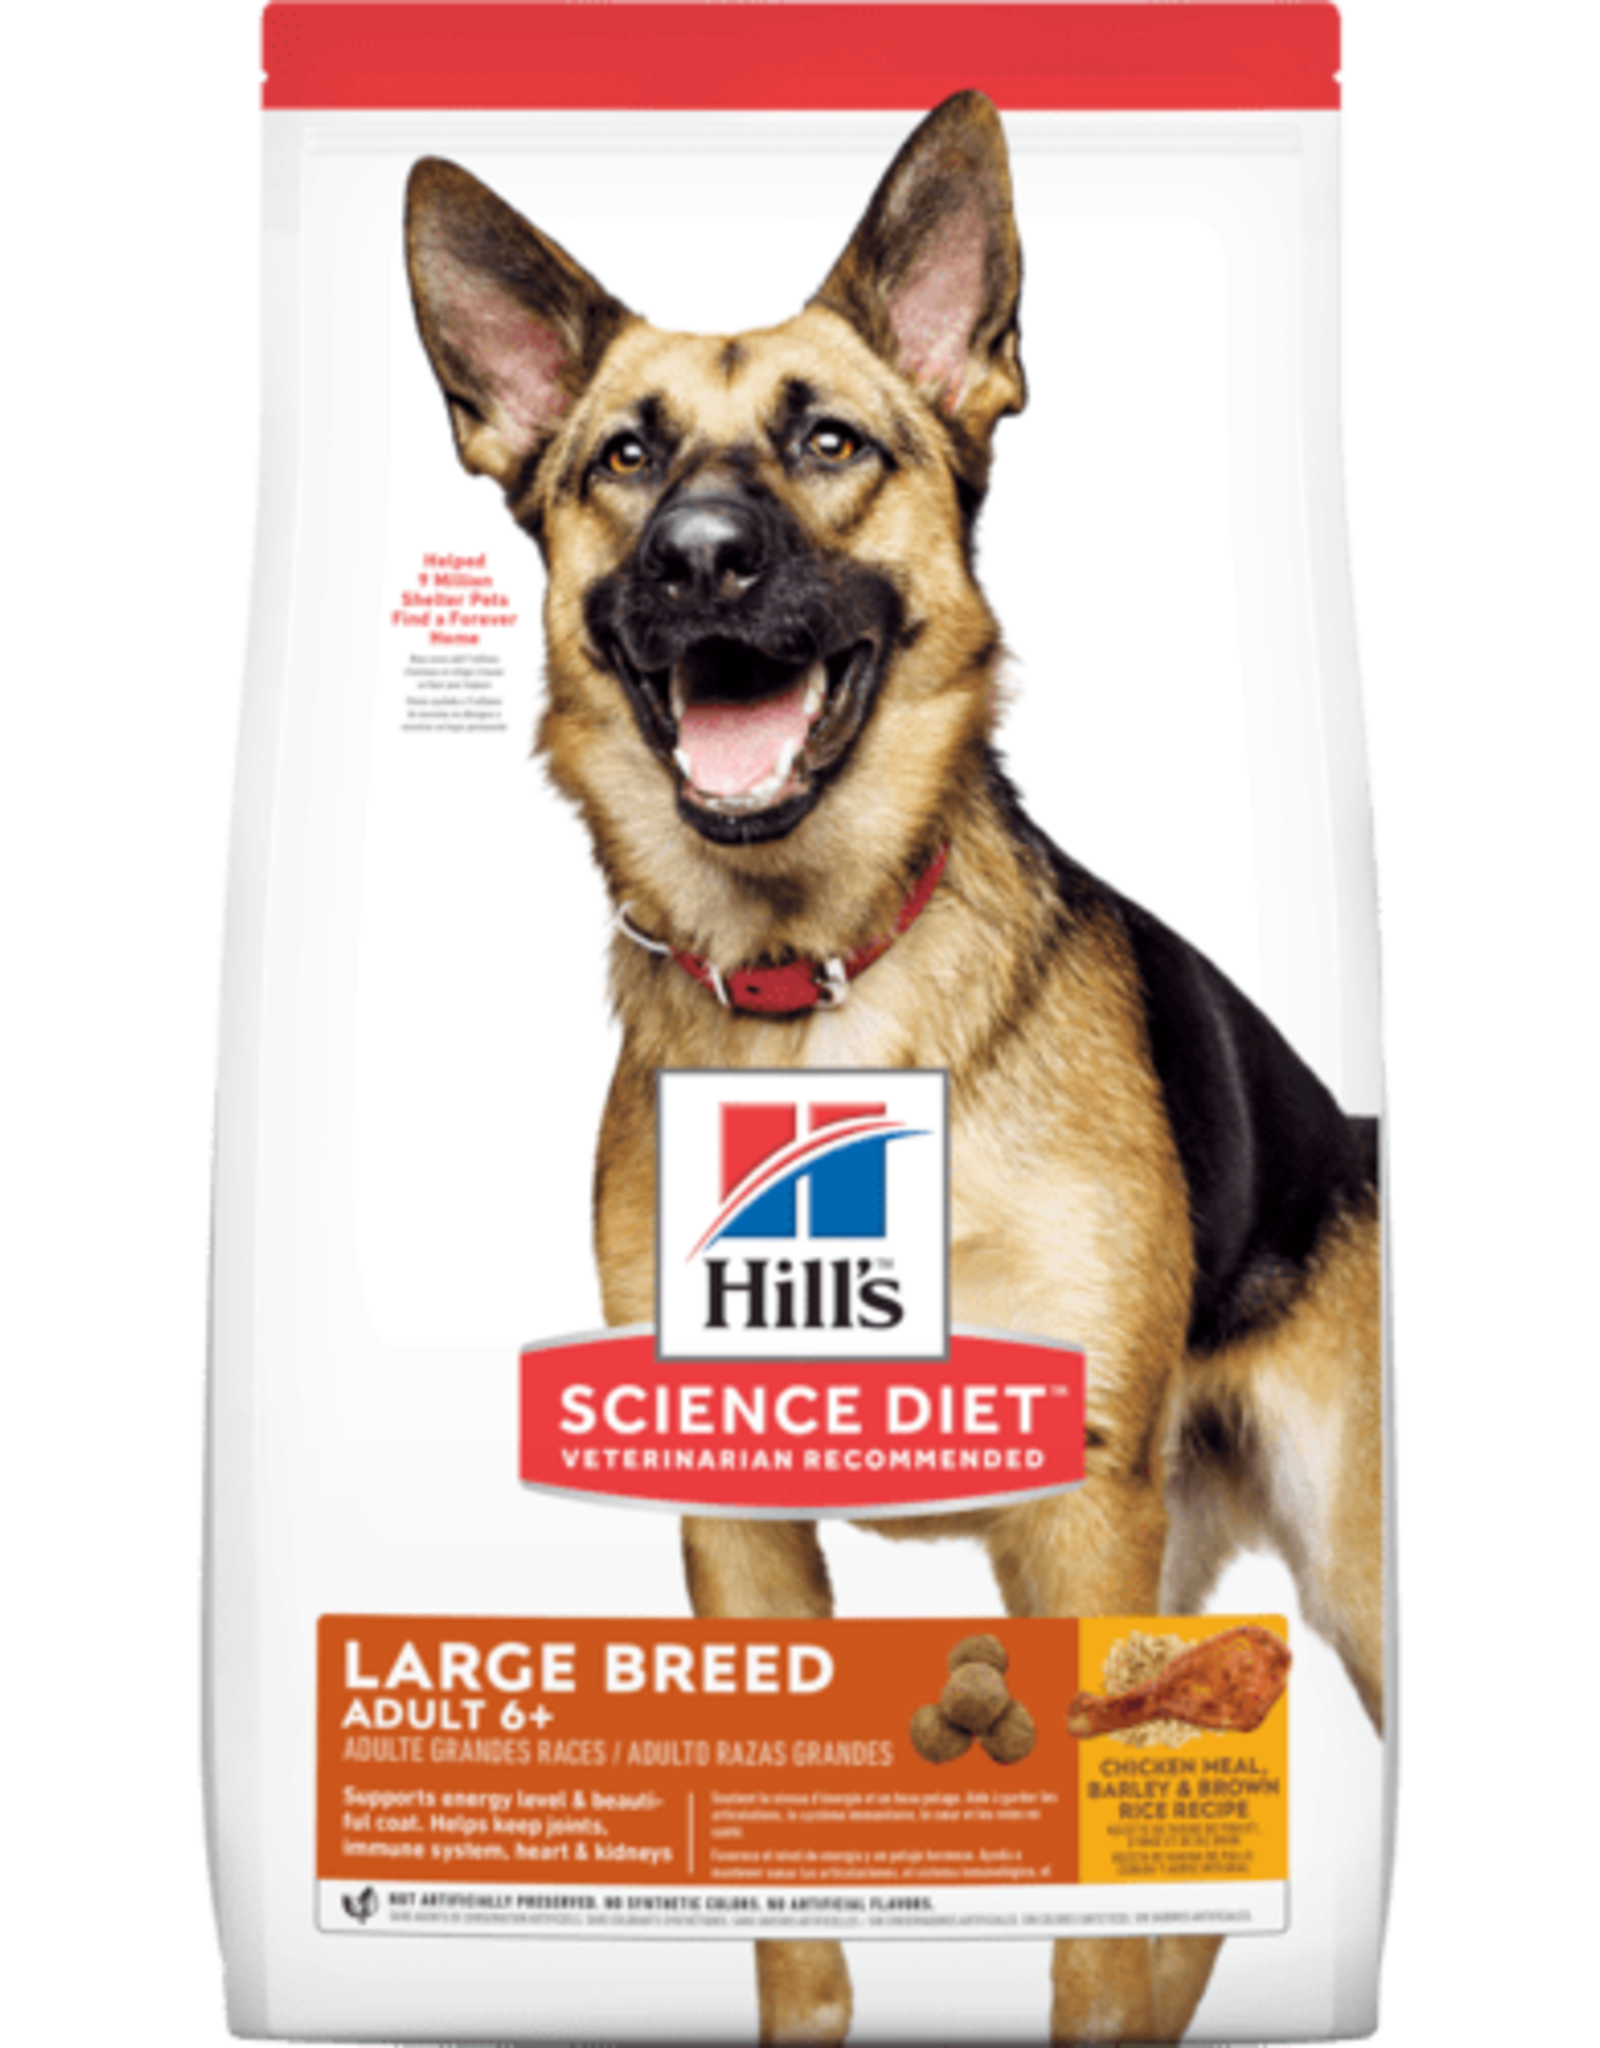 SCIENCE DIET HILL's SCIENCE DIET CANINE LARGE BREED MATURE ADULT 6+ 33LBS